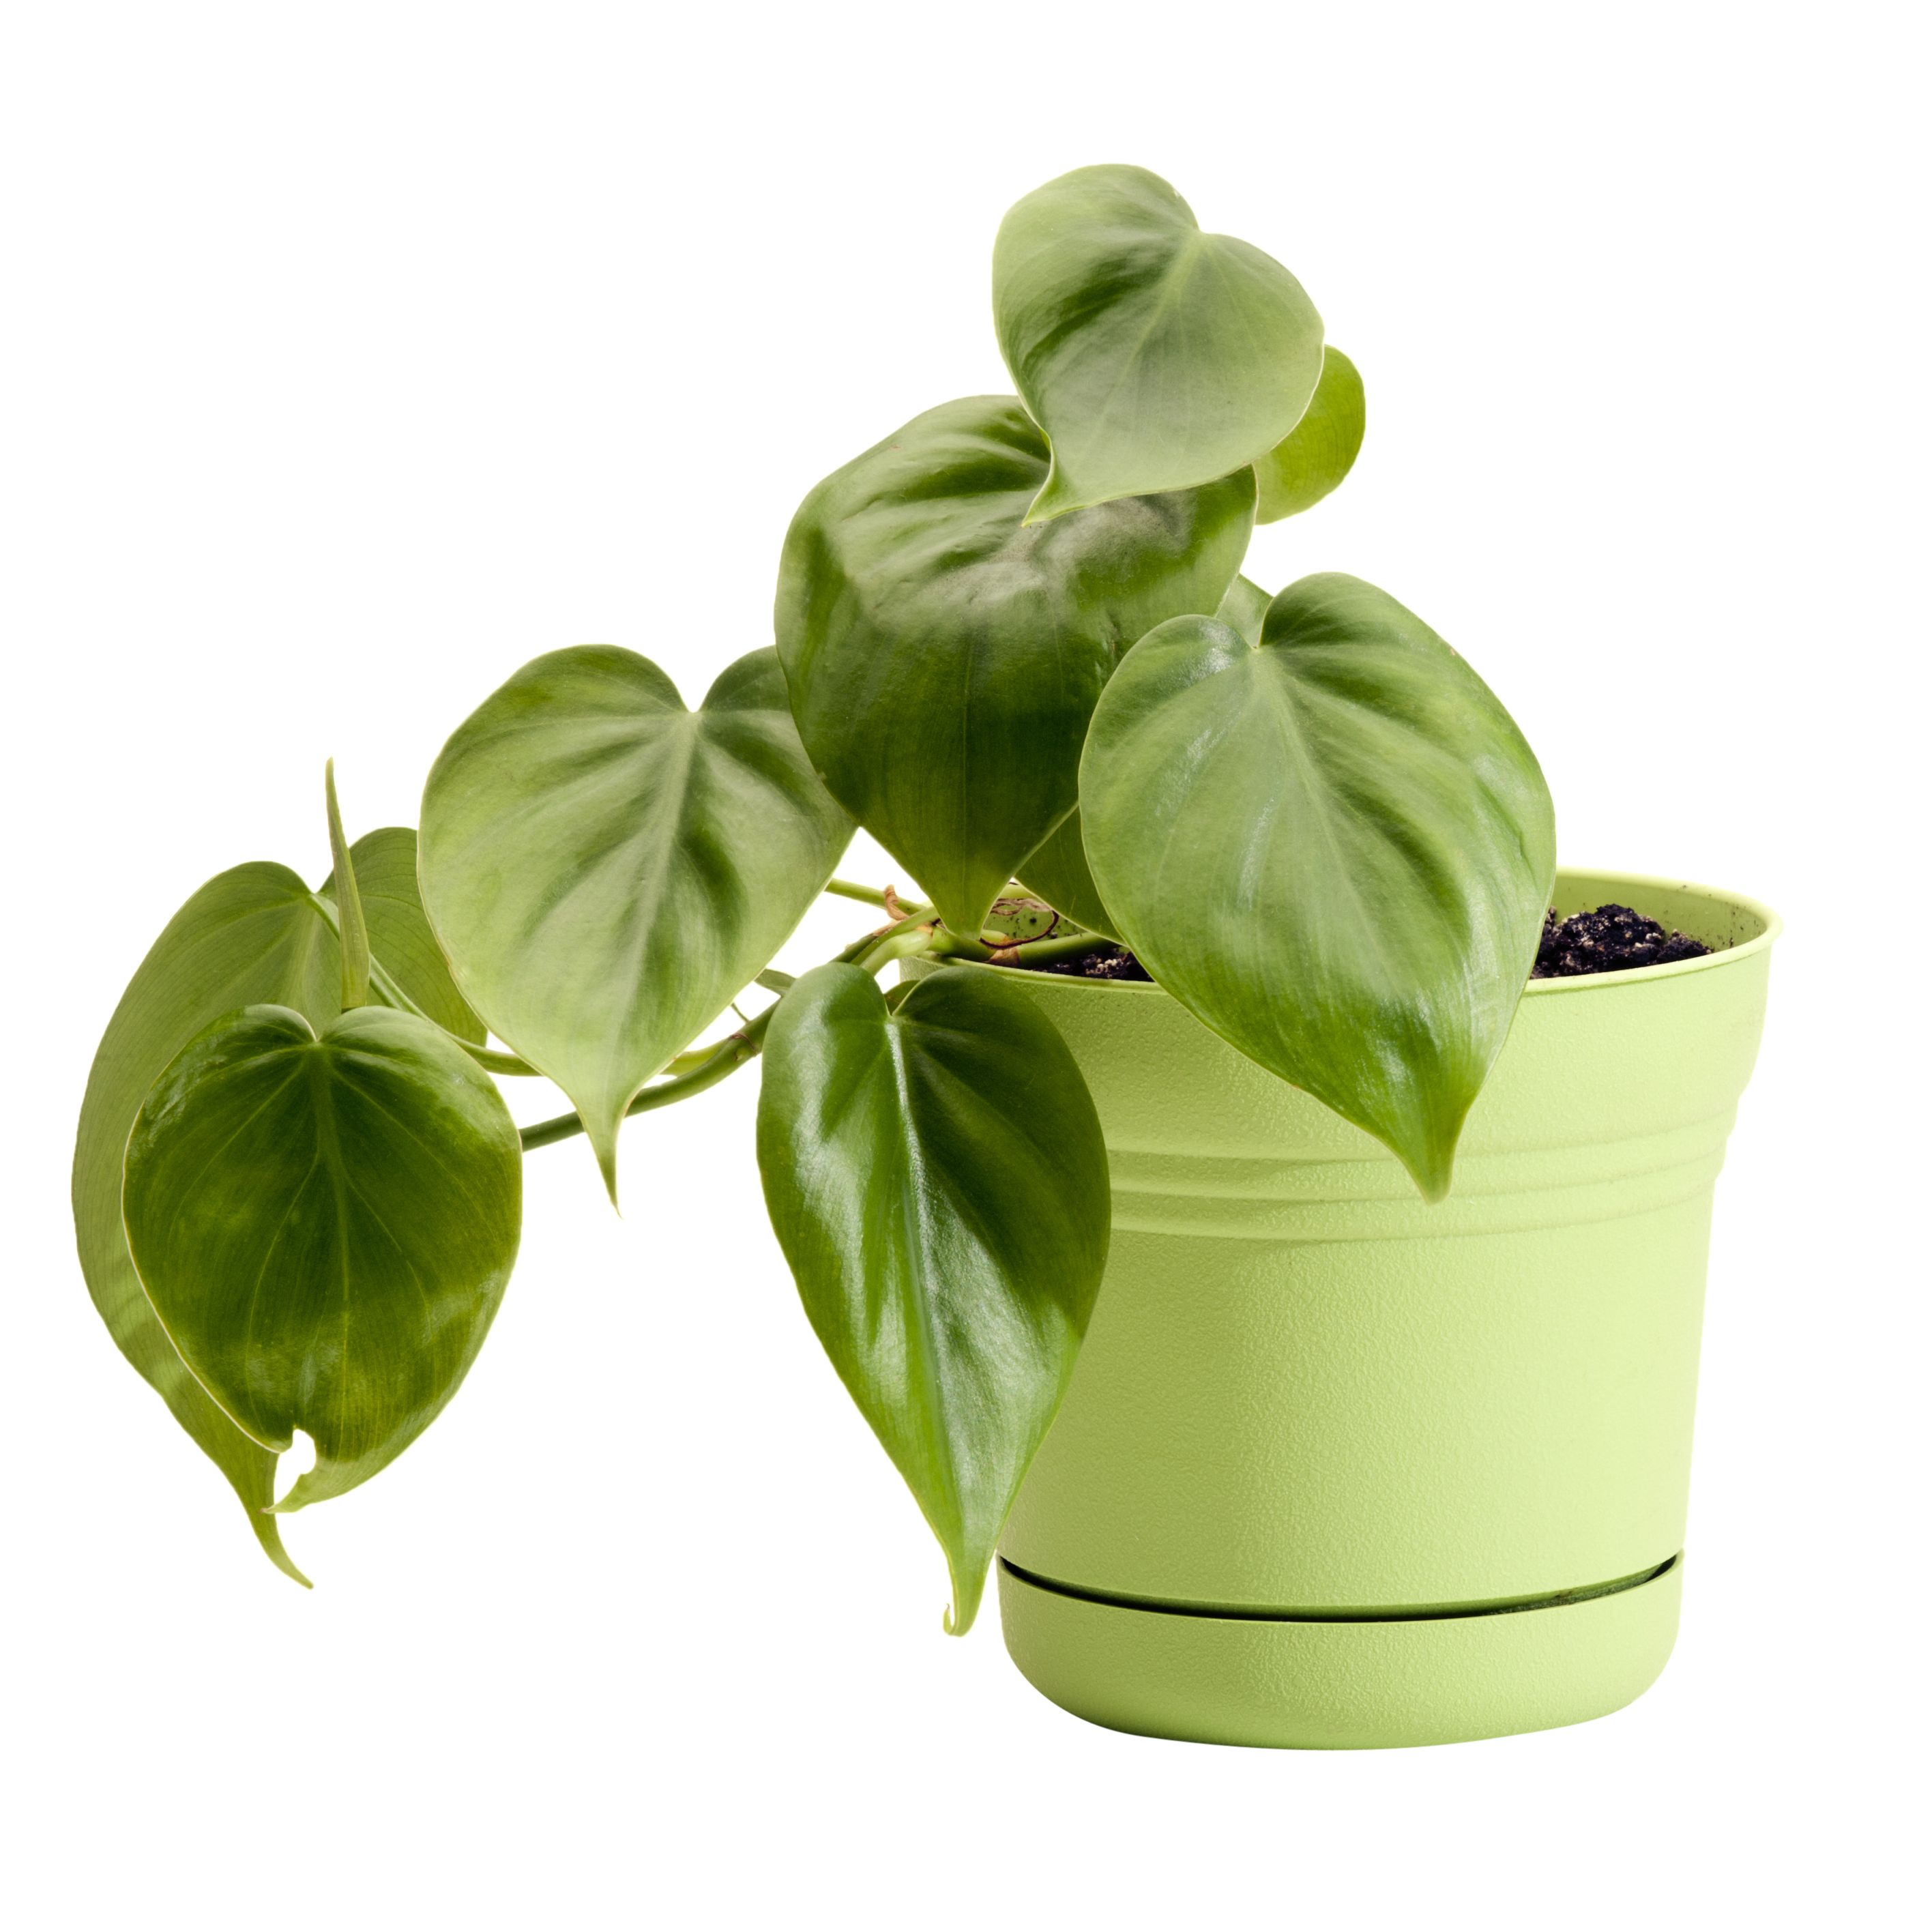 https://hips.hearstapps.com/hmg-prod/images/potted-philodendron-in-a-green-planter-royalty-free-image-1645541883.jpg